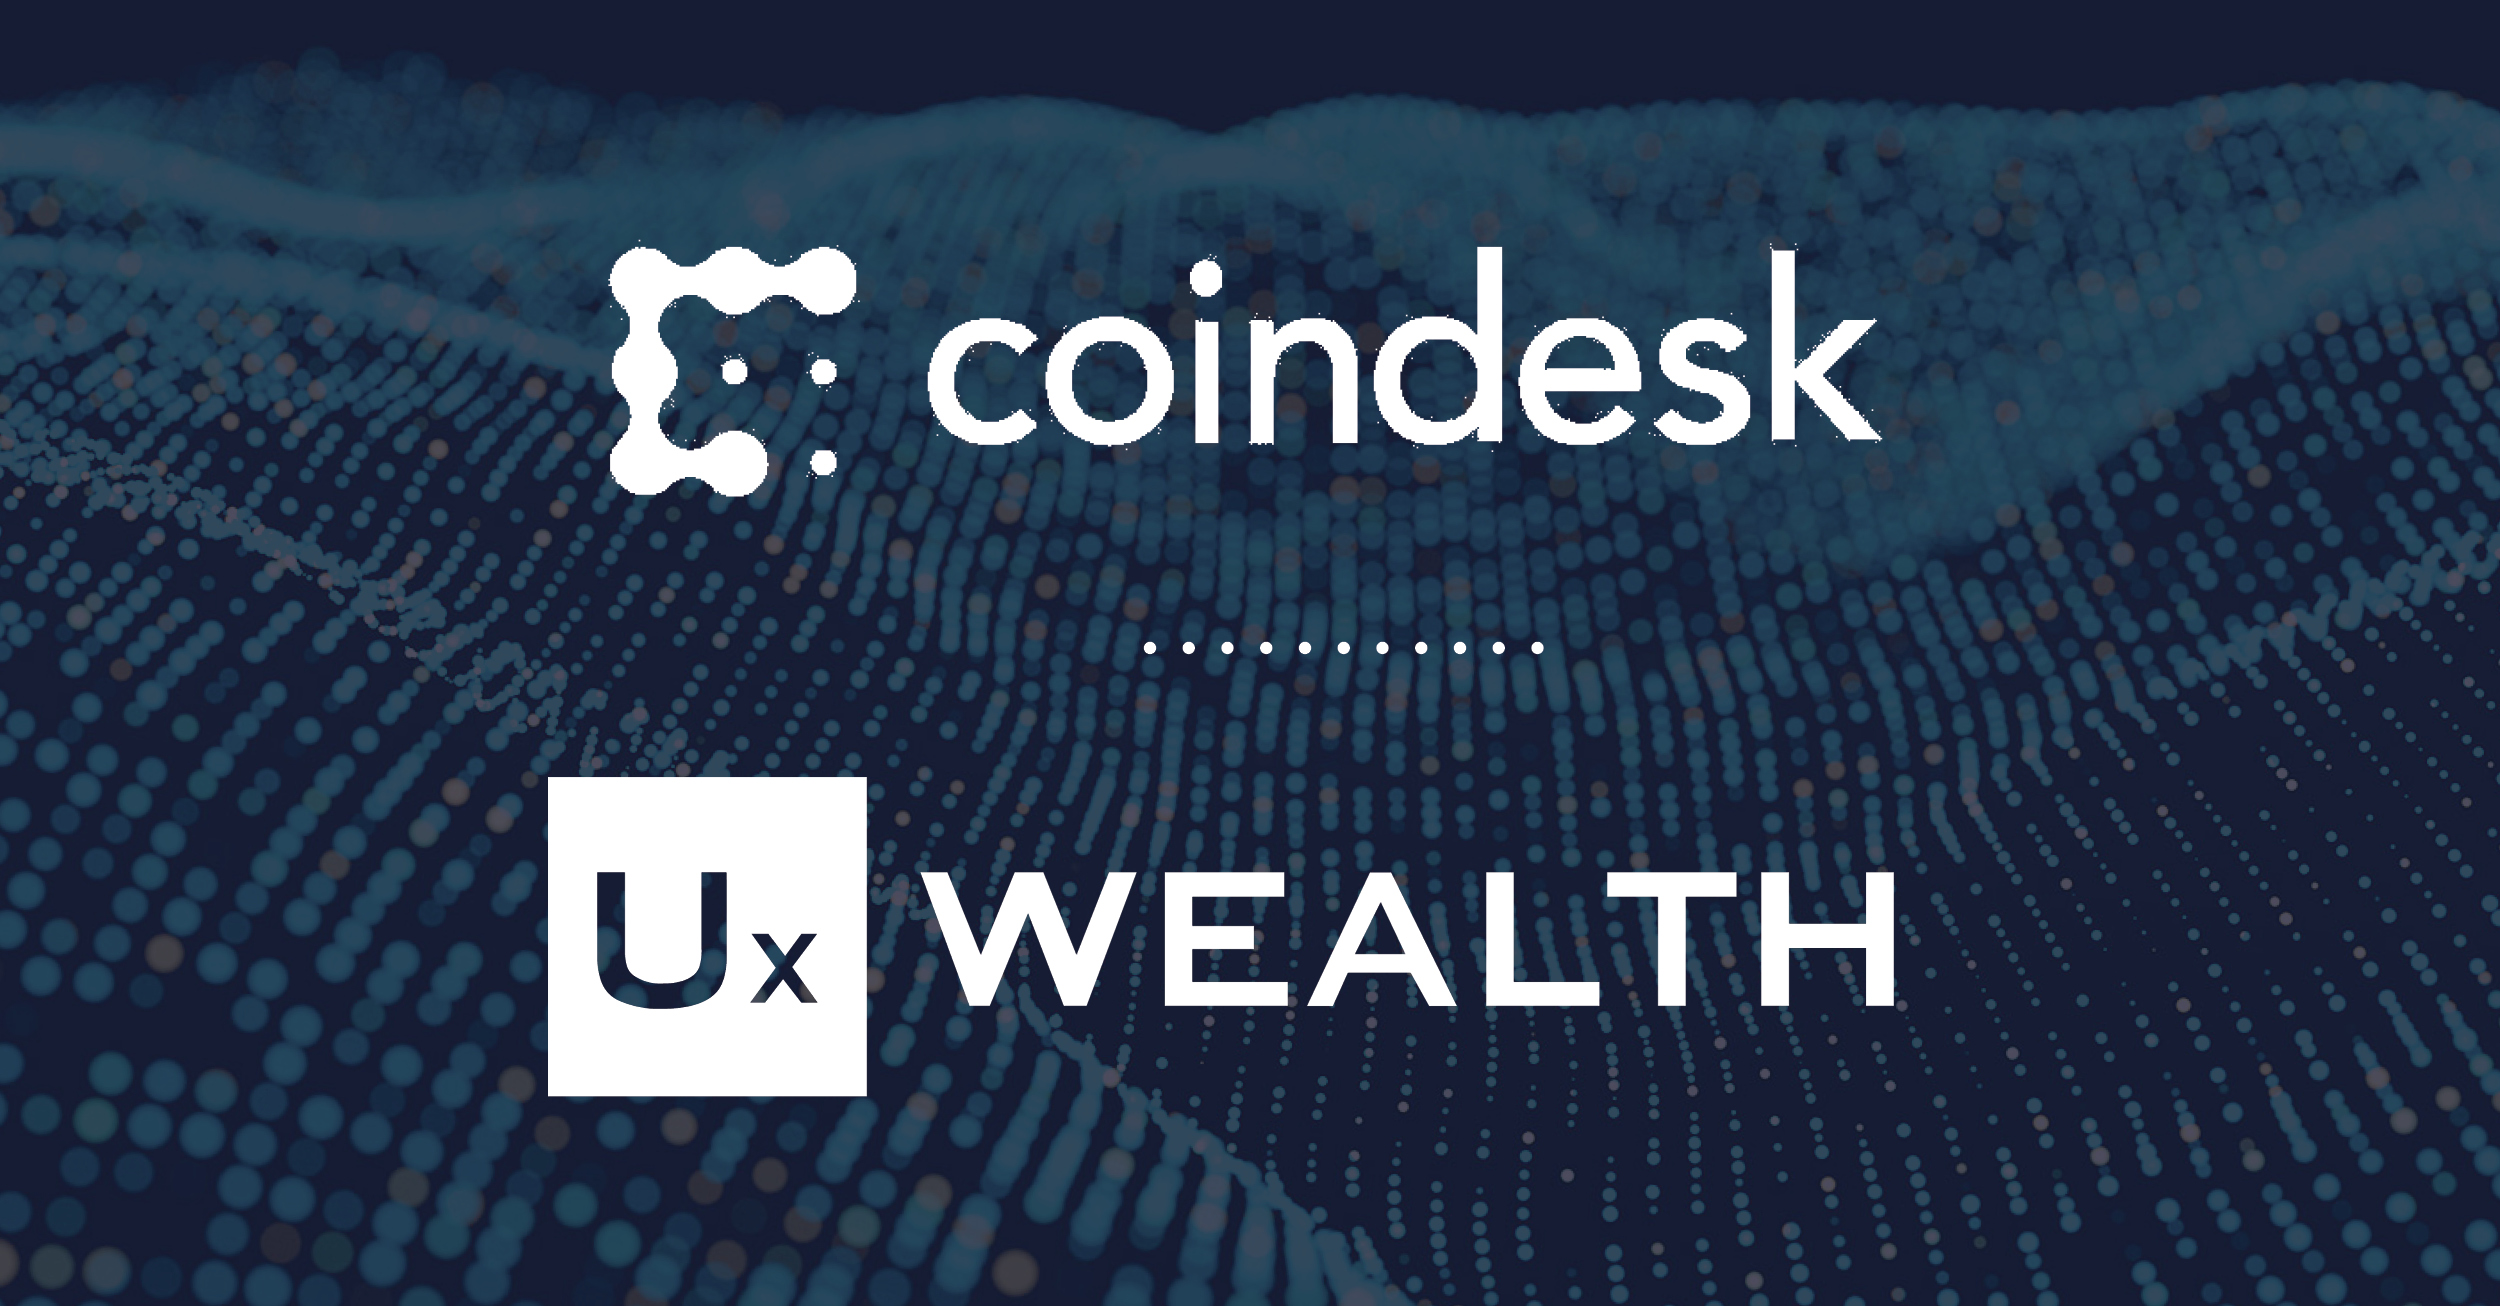 UX-Wealth-Partners-coindesk